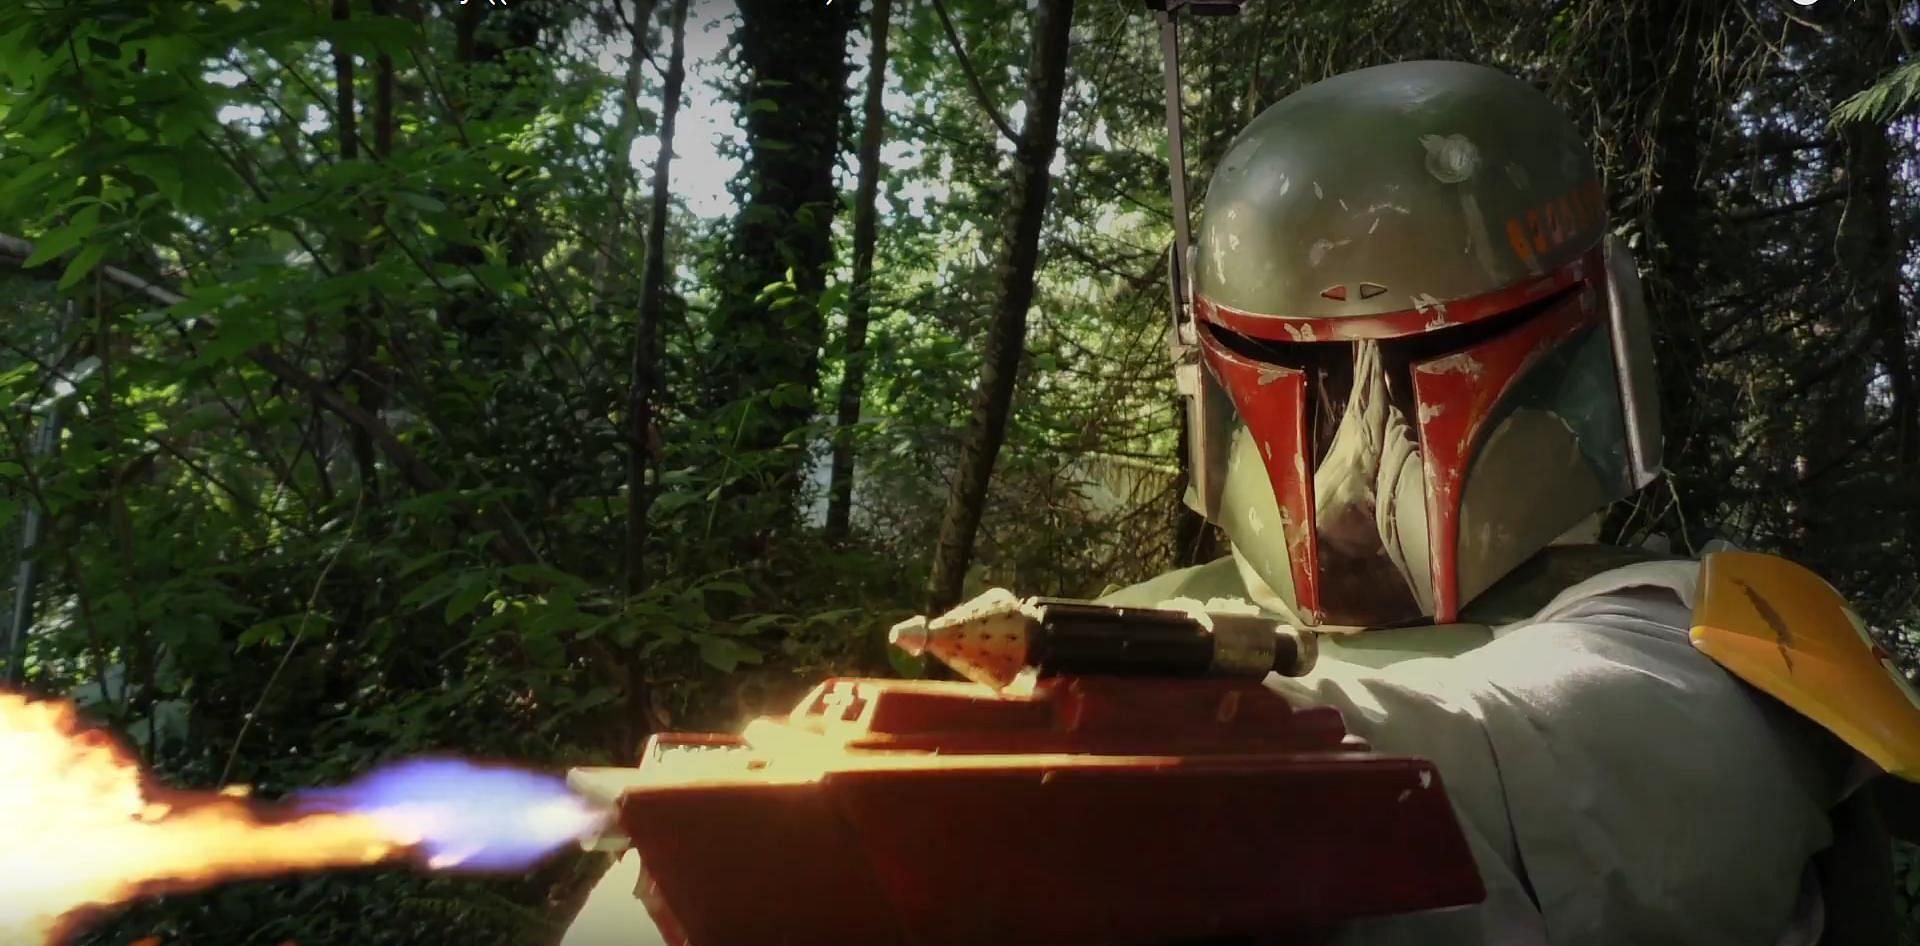 Unmasking the legend: 10 reasons Why Boba Fett captured our hearts (Image via Lucasfilm)